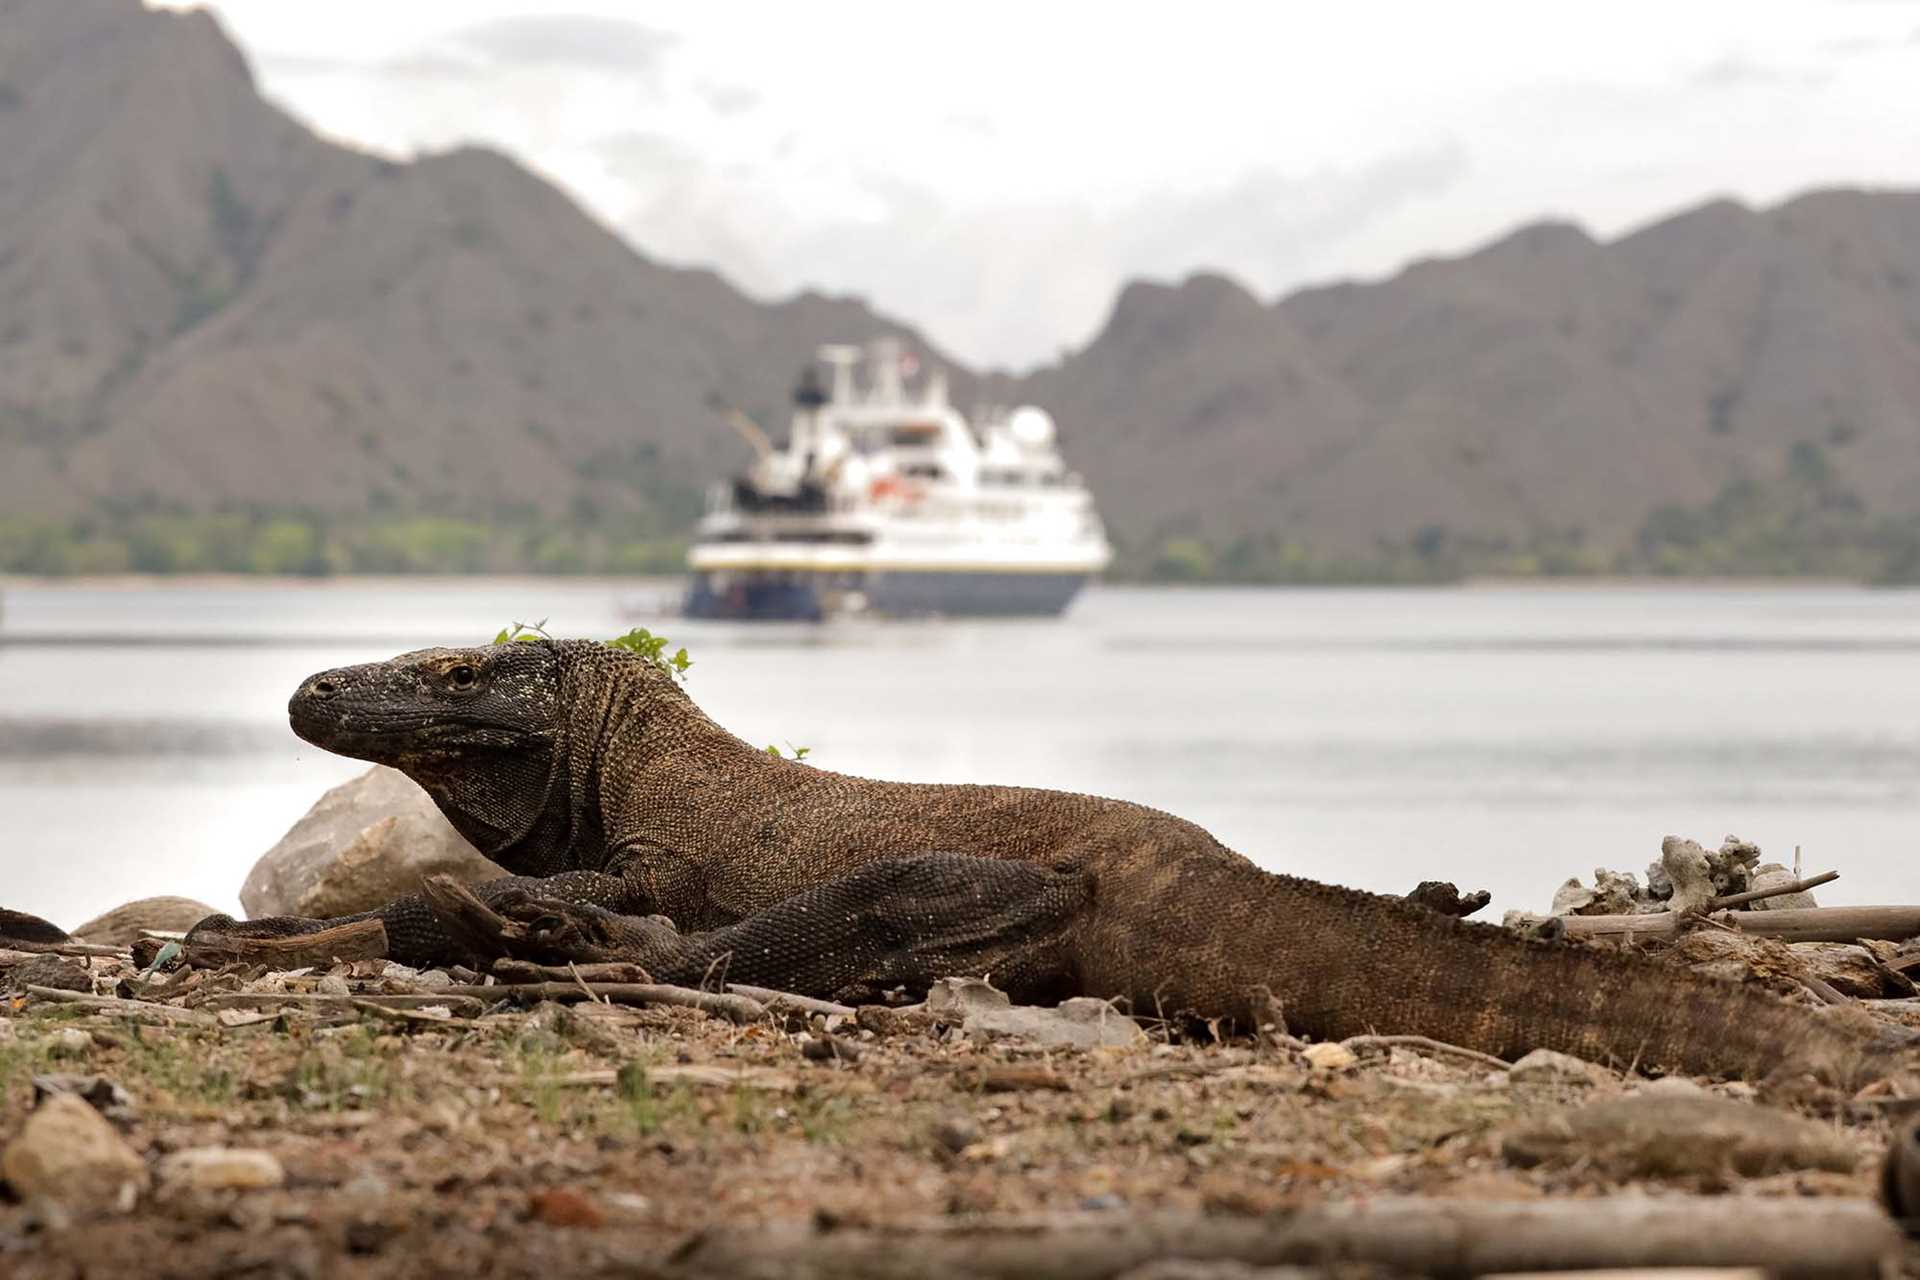 komodo dragon with national geographic orion ship in the background